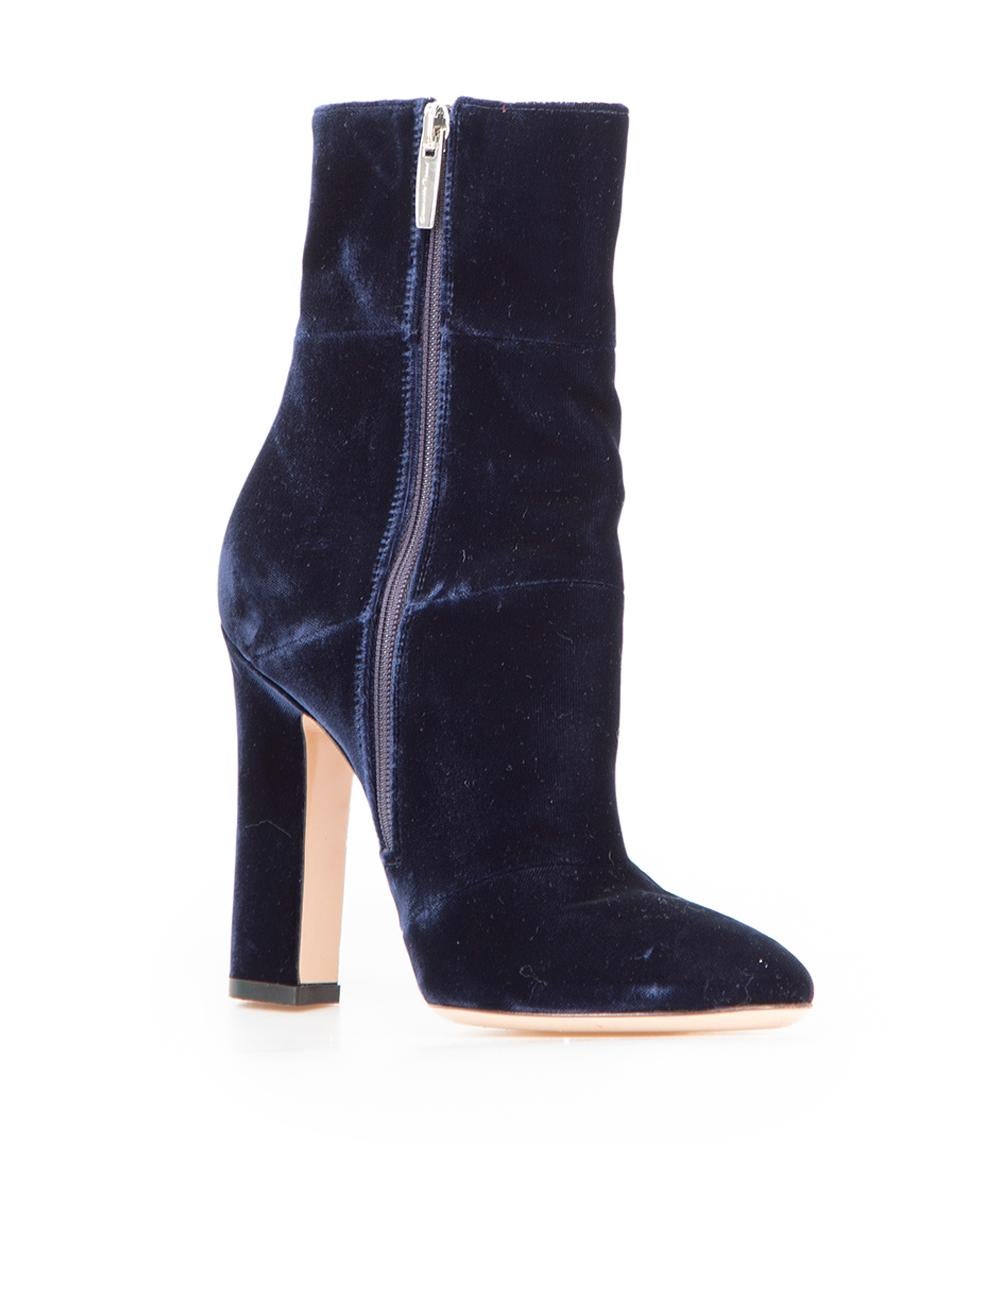 CONDITION is Very good. Hardly any visible wear to boots is evident on this used Gianvito Rossi designer resale item.
 
 Details
 Blue
 Velvet
 Heeled boots
 Round toe
 Side zip fastening
 High heeled
 
 
 Made in Italy
 
 Composition
 EXTERIOR: